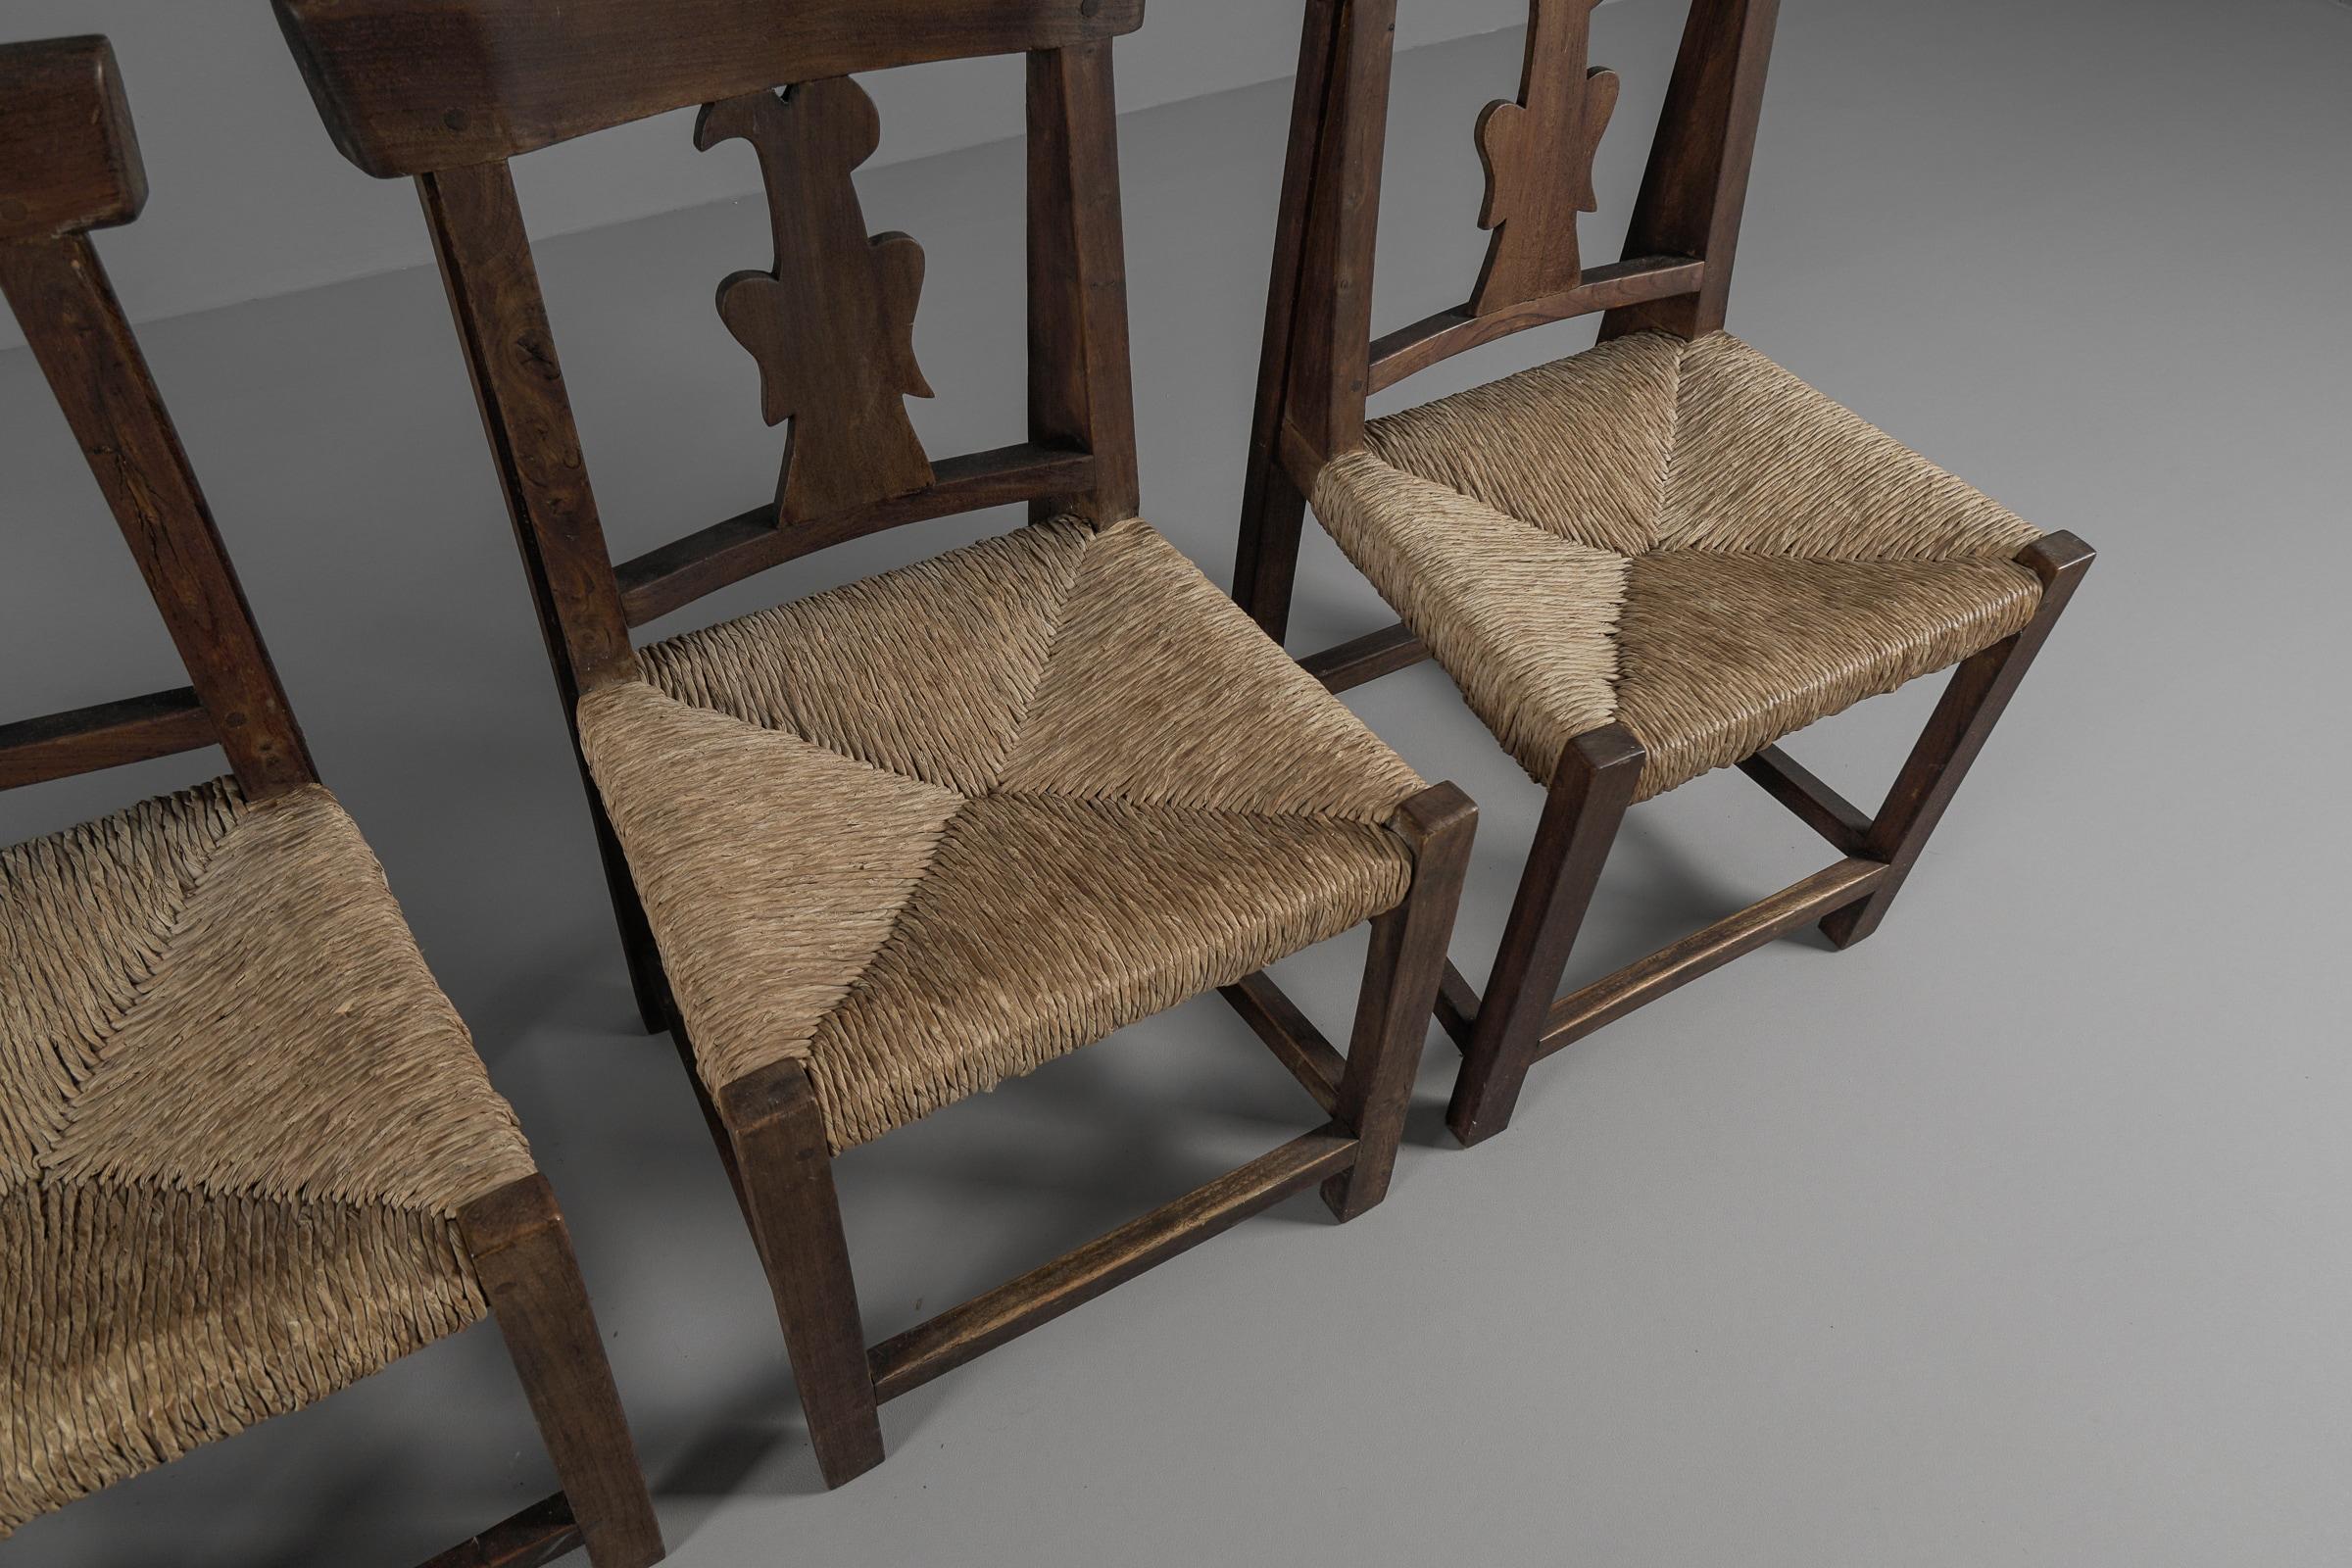 Set of 4 French Provincial Wood & Seagrass Chairs, 1960s Mid-Century Modern For Sale 11